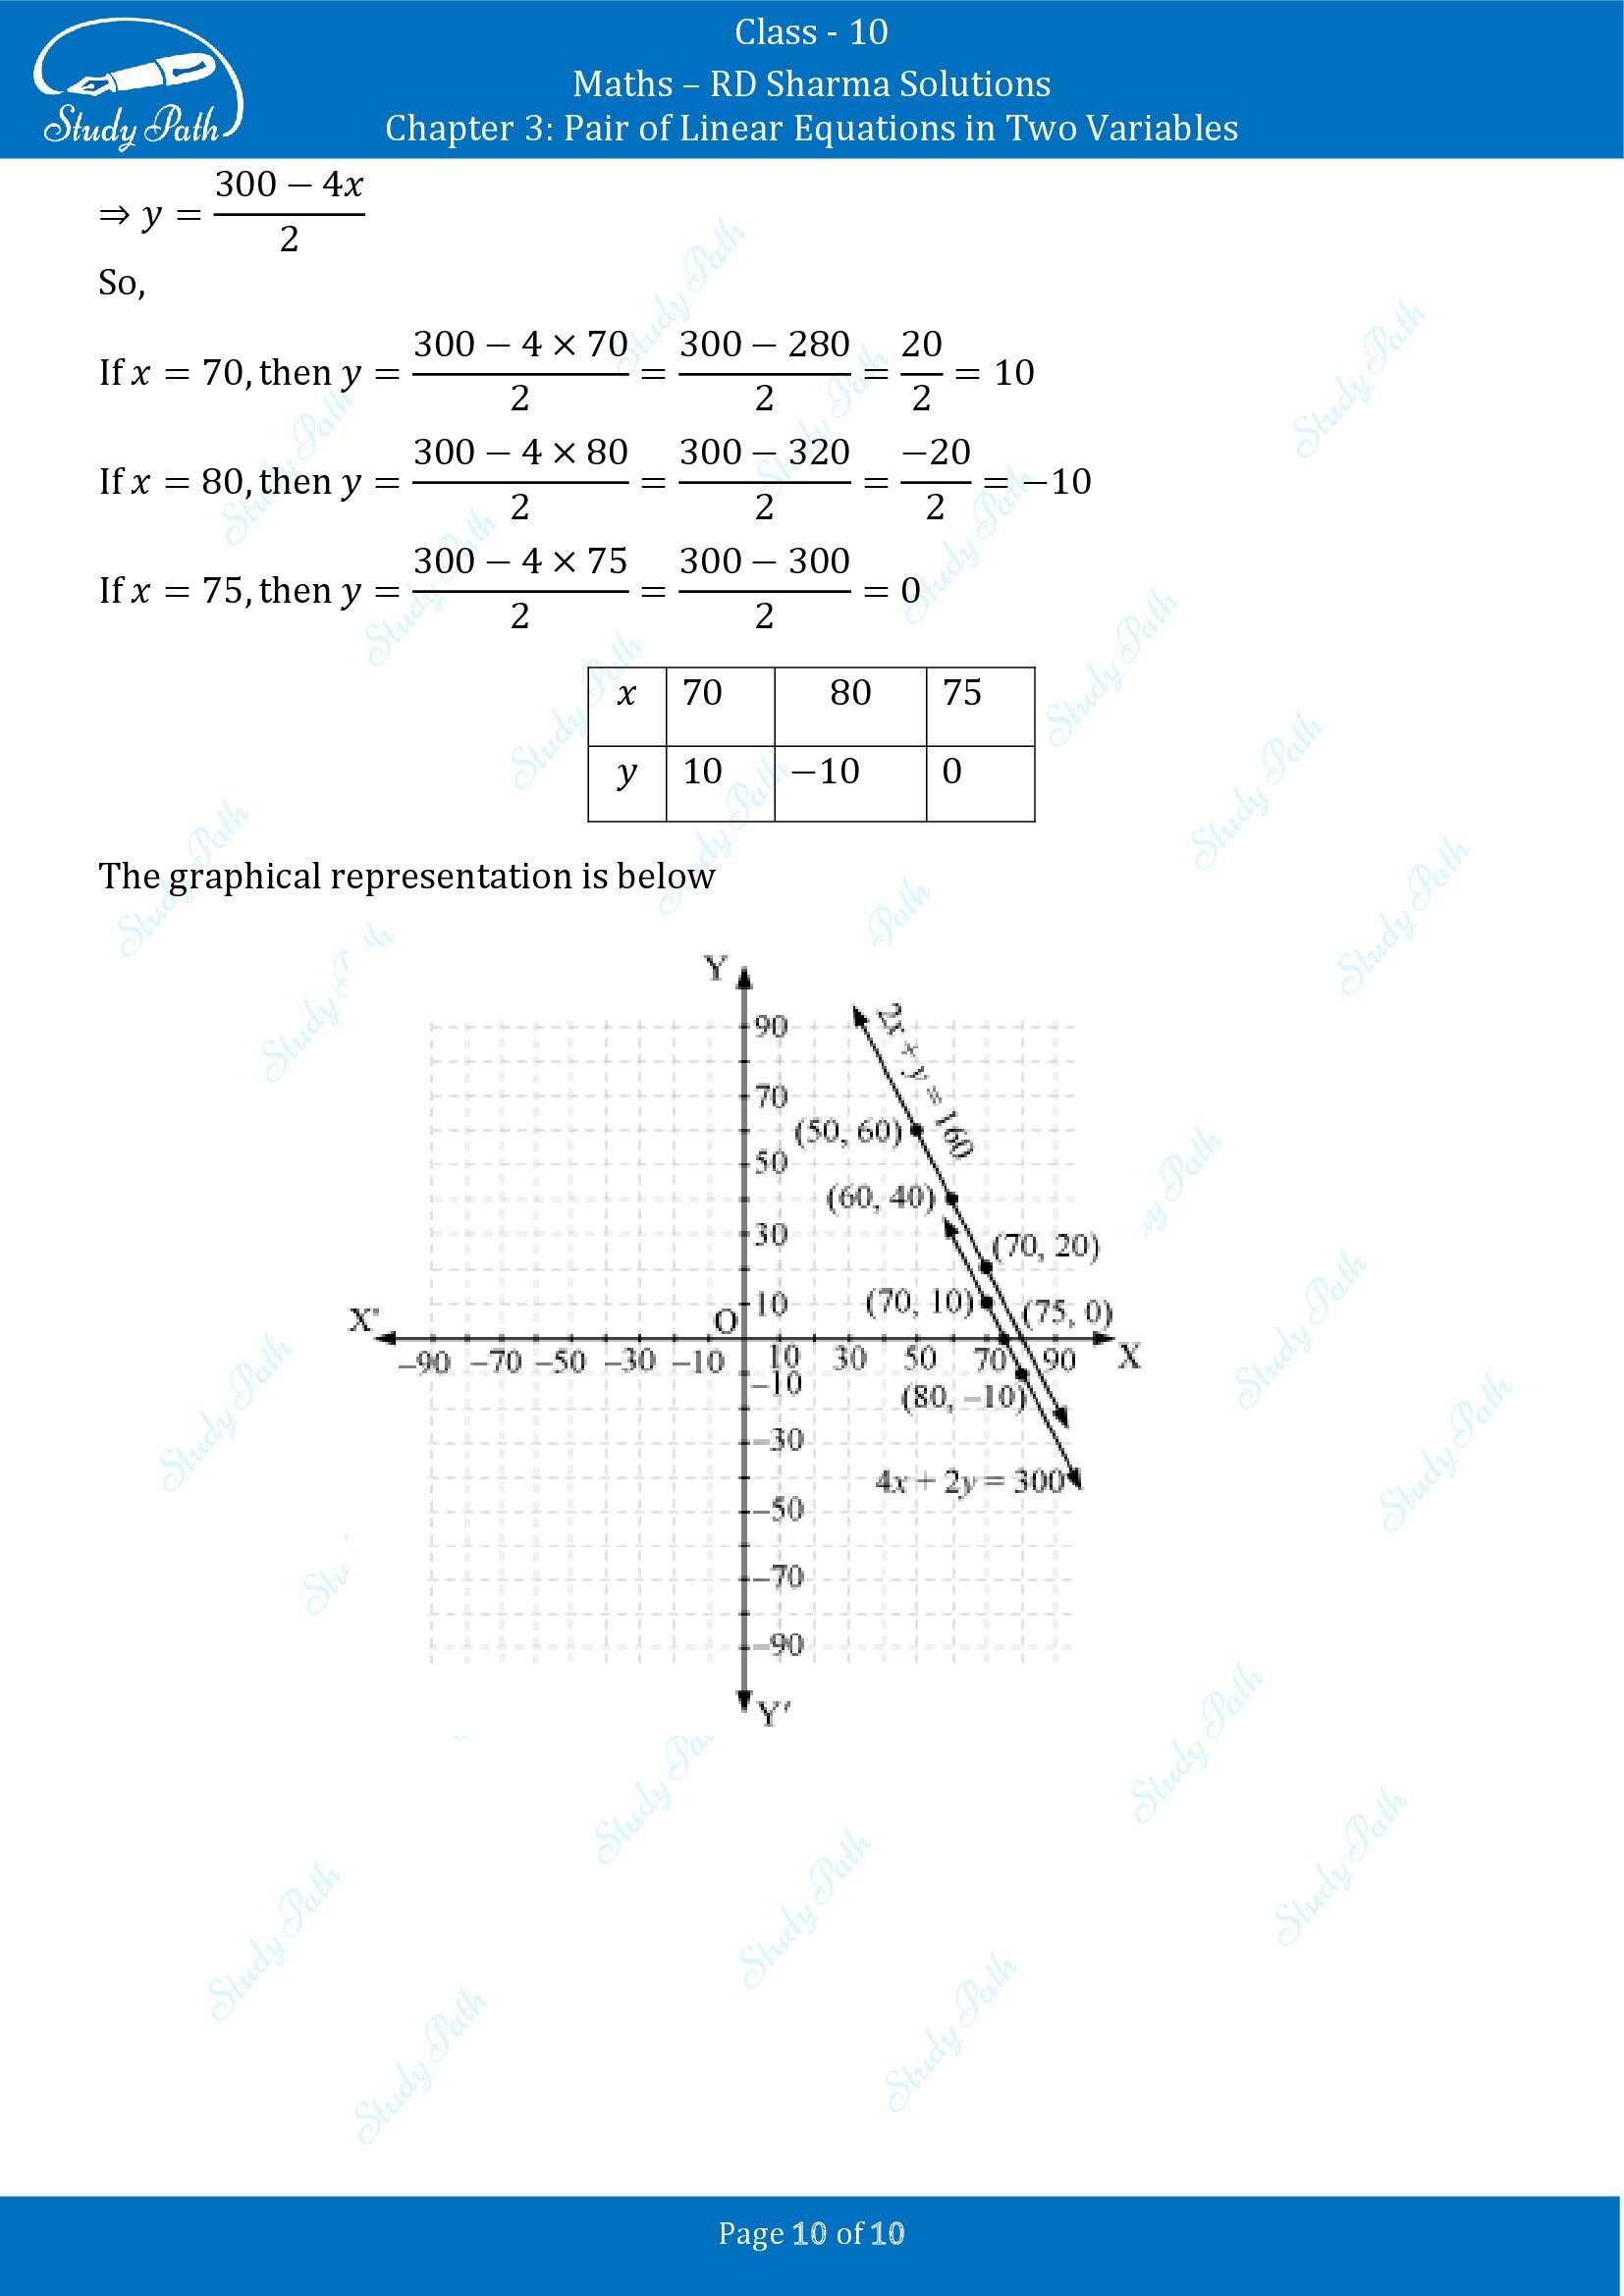 RD Sharma Solutions Class 10 Chapter 3 Pair of Linear Equations in Two Variables Exercise 3.1 00010